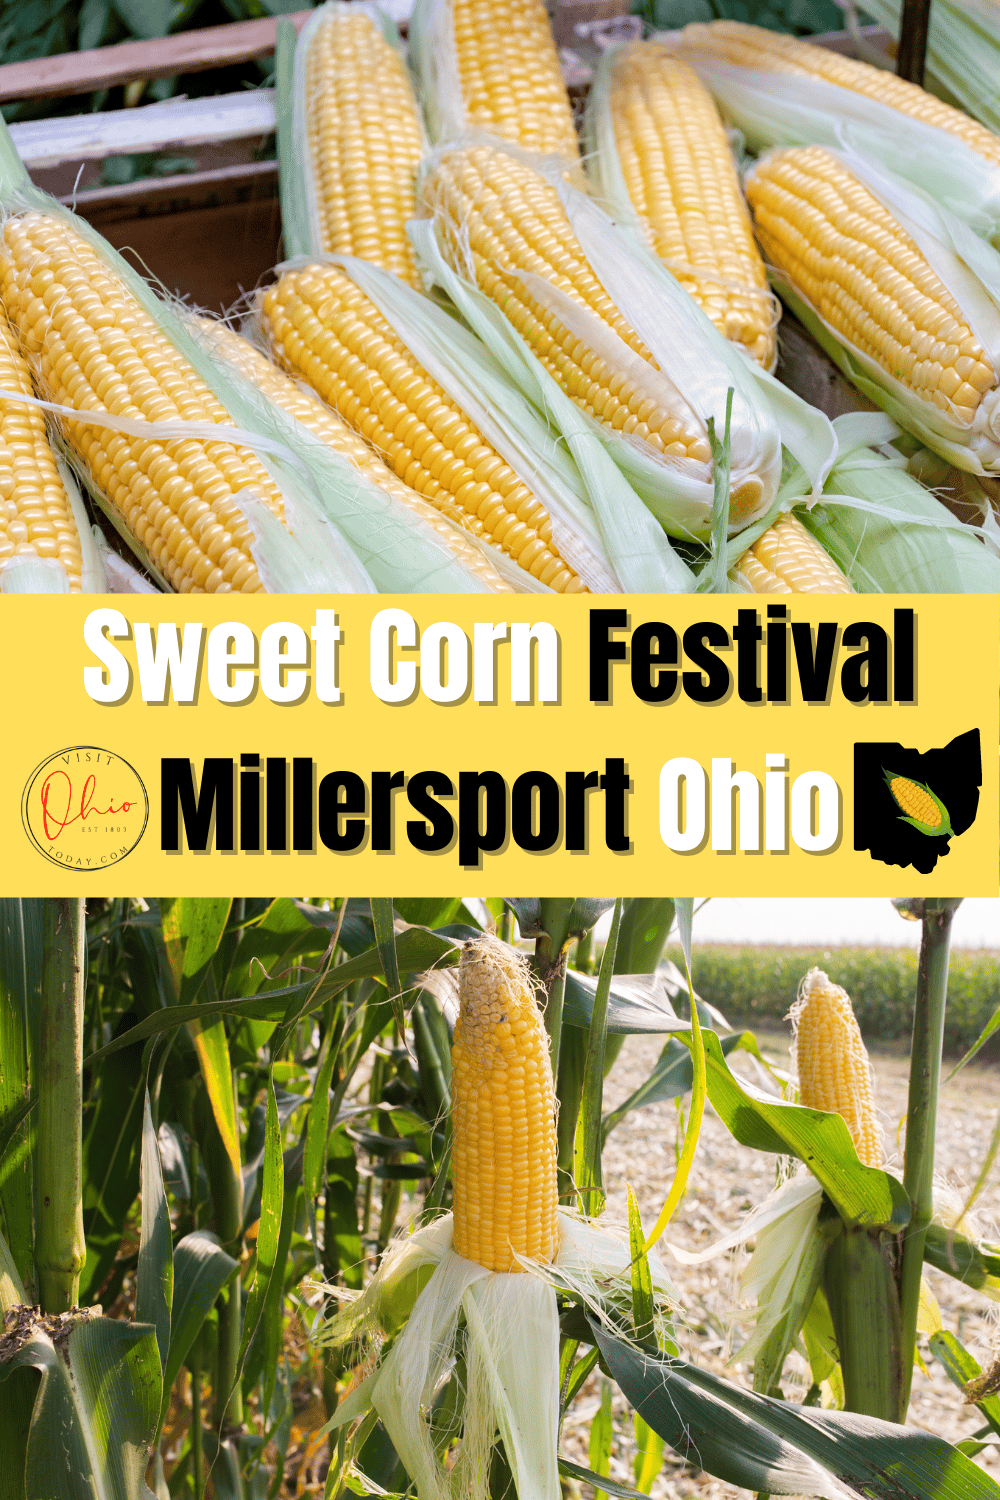 Close up photo of yellow ears of corn. Text overlay says sweet corn festival millersport ohio